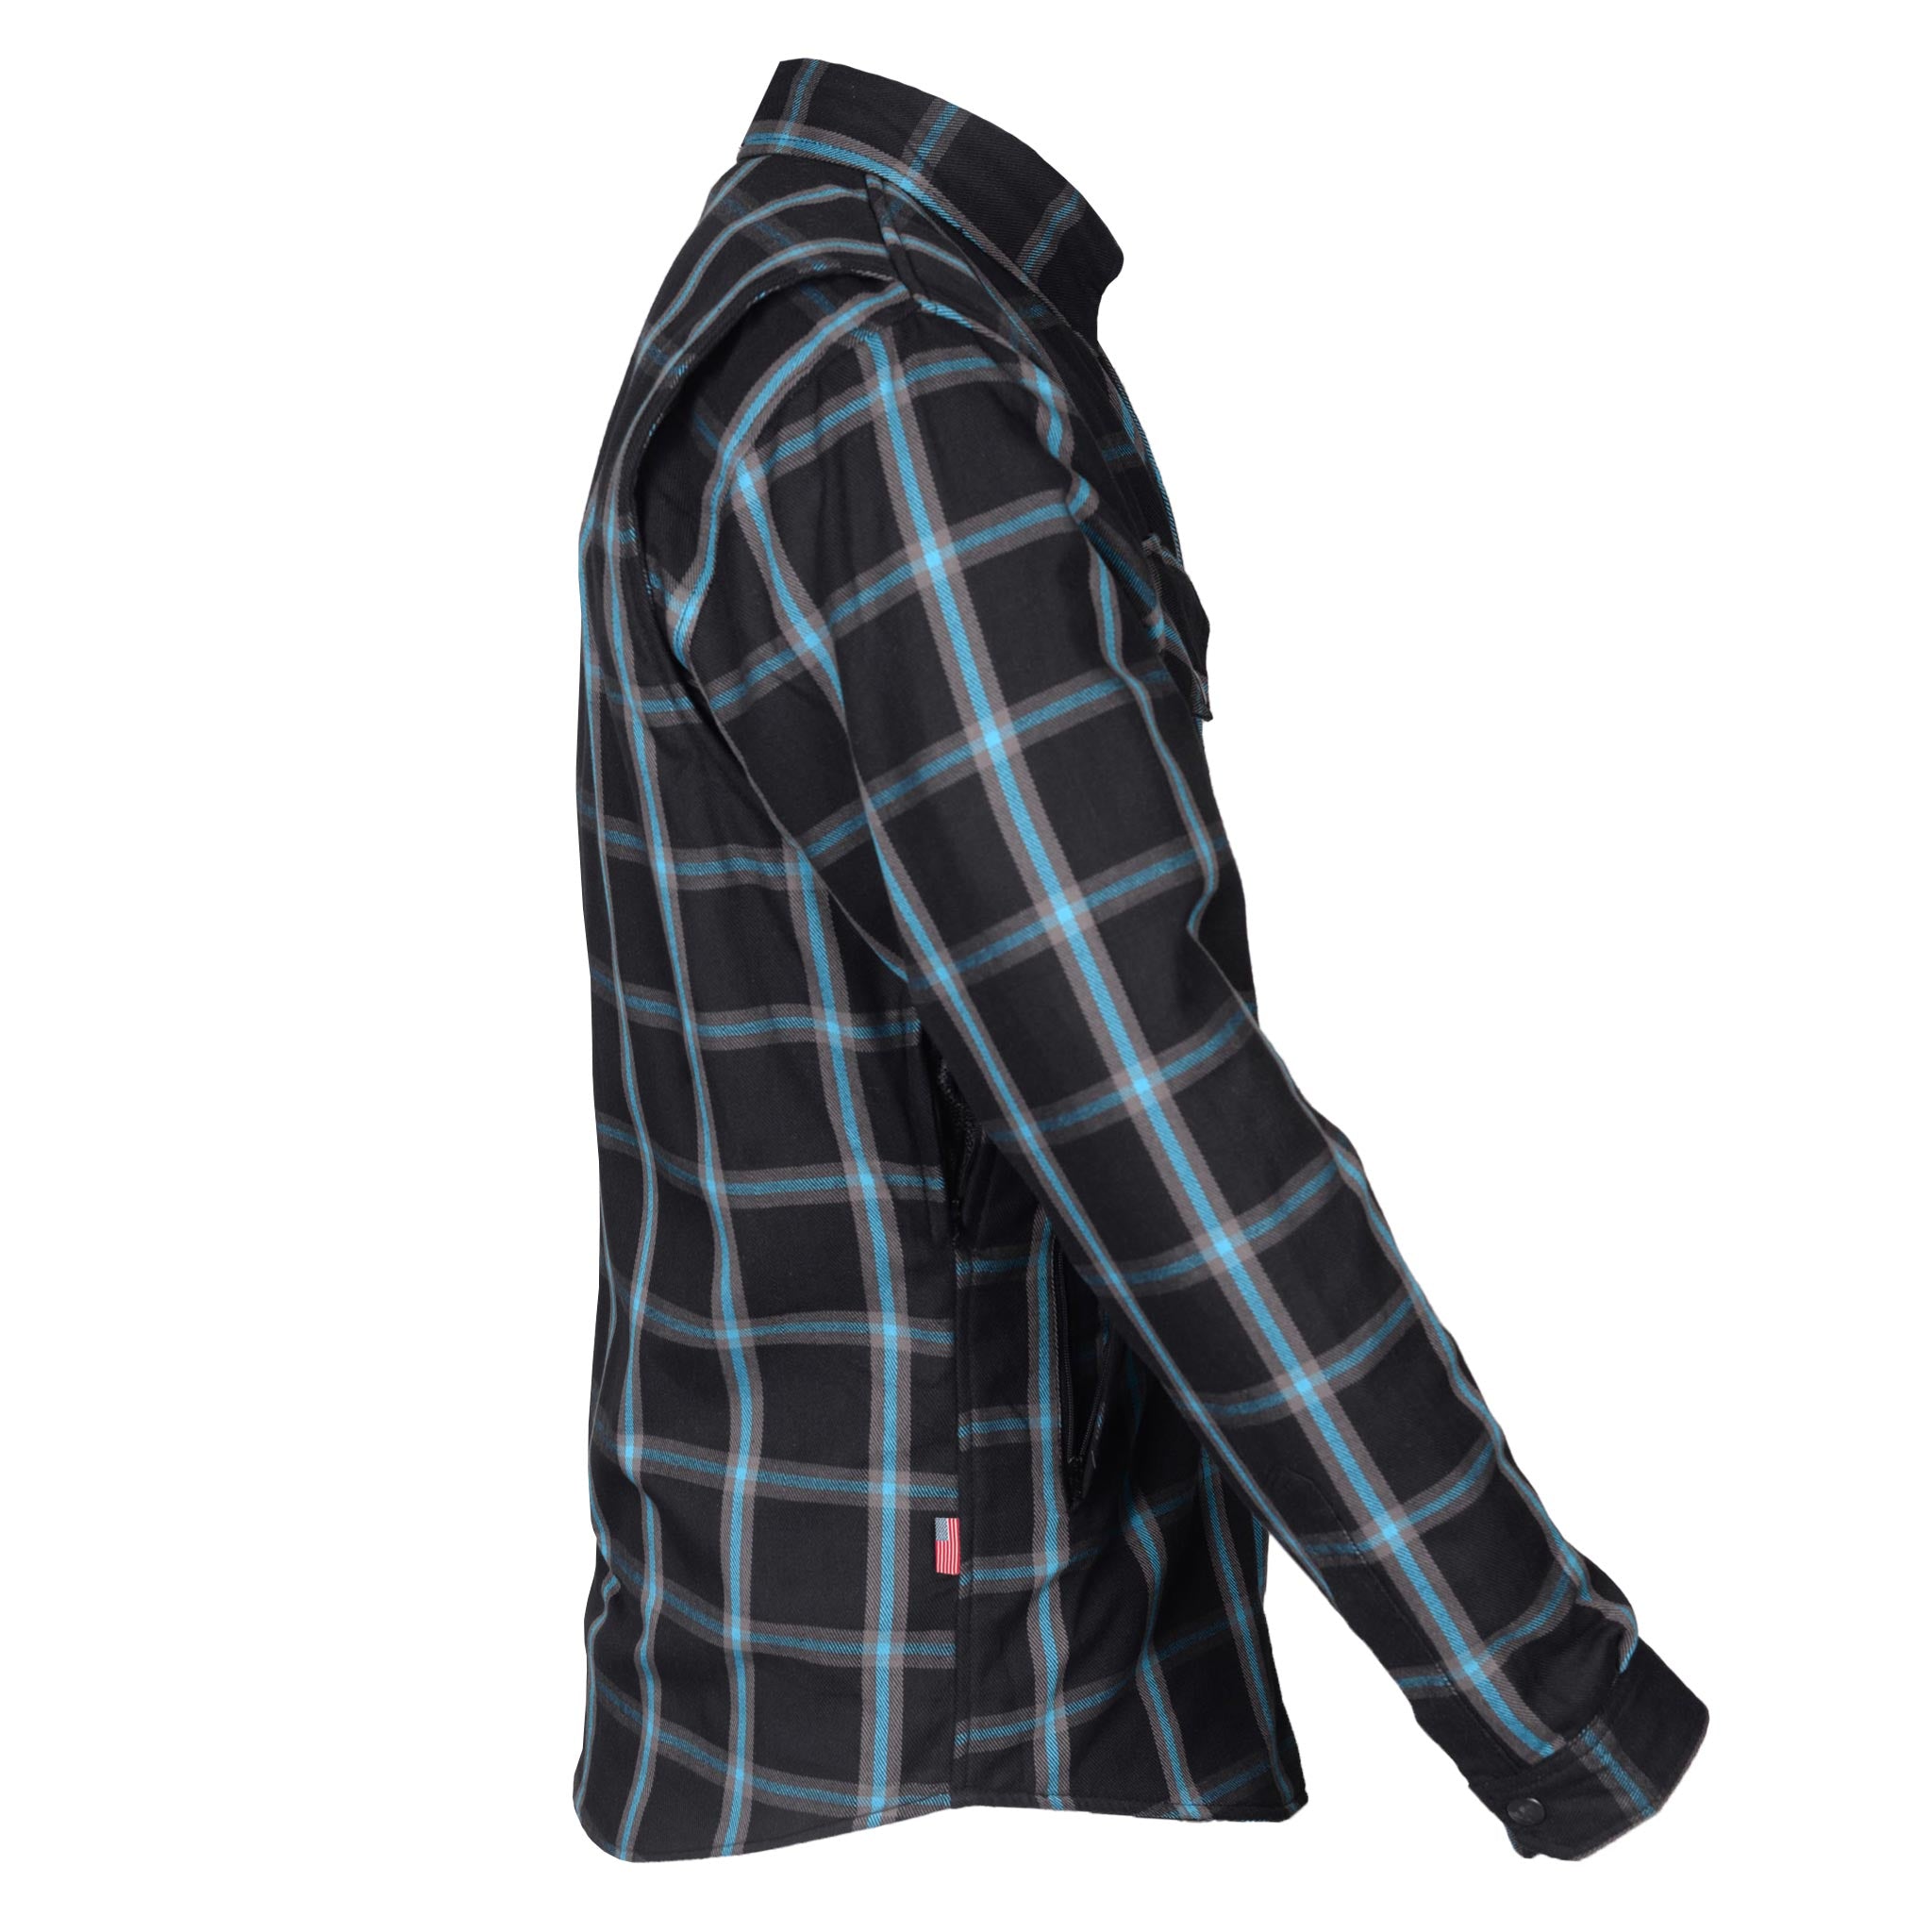 Protective Flannel Shirt "Blue Bypass" - Black and Blue Stripes with Pads